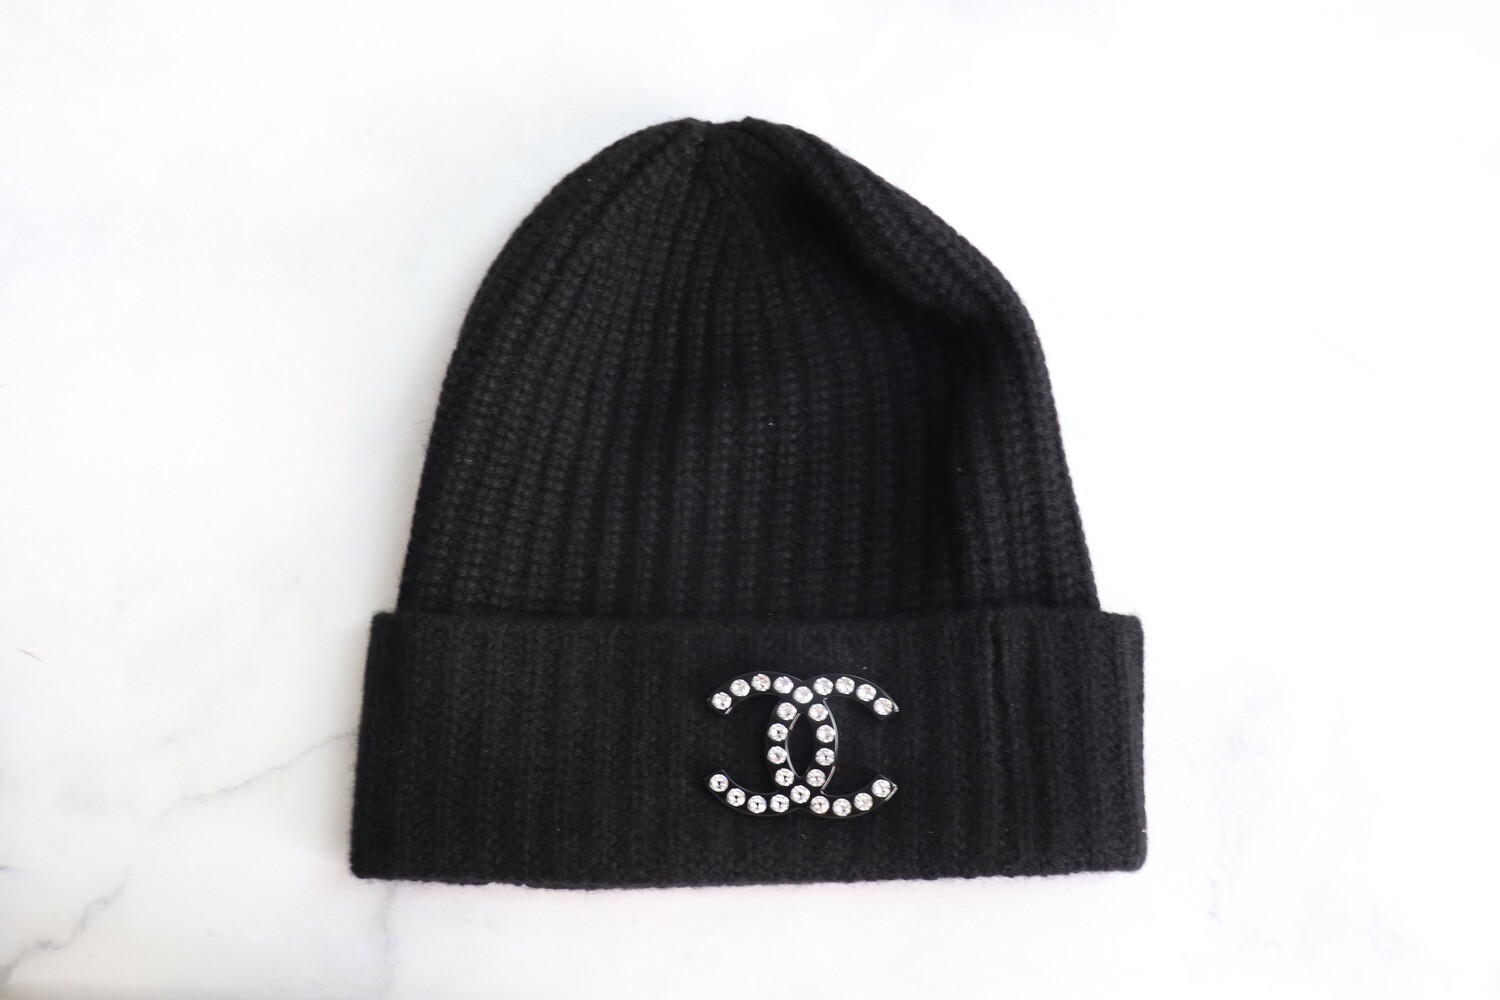 Chanel Hat Beanie Black with Crystal Brooch, New - No Box